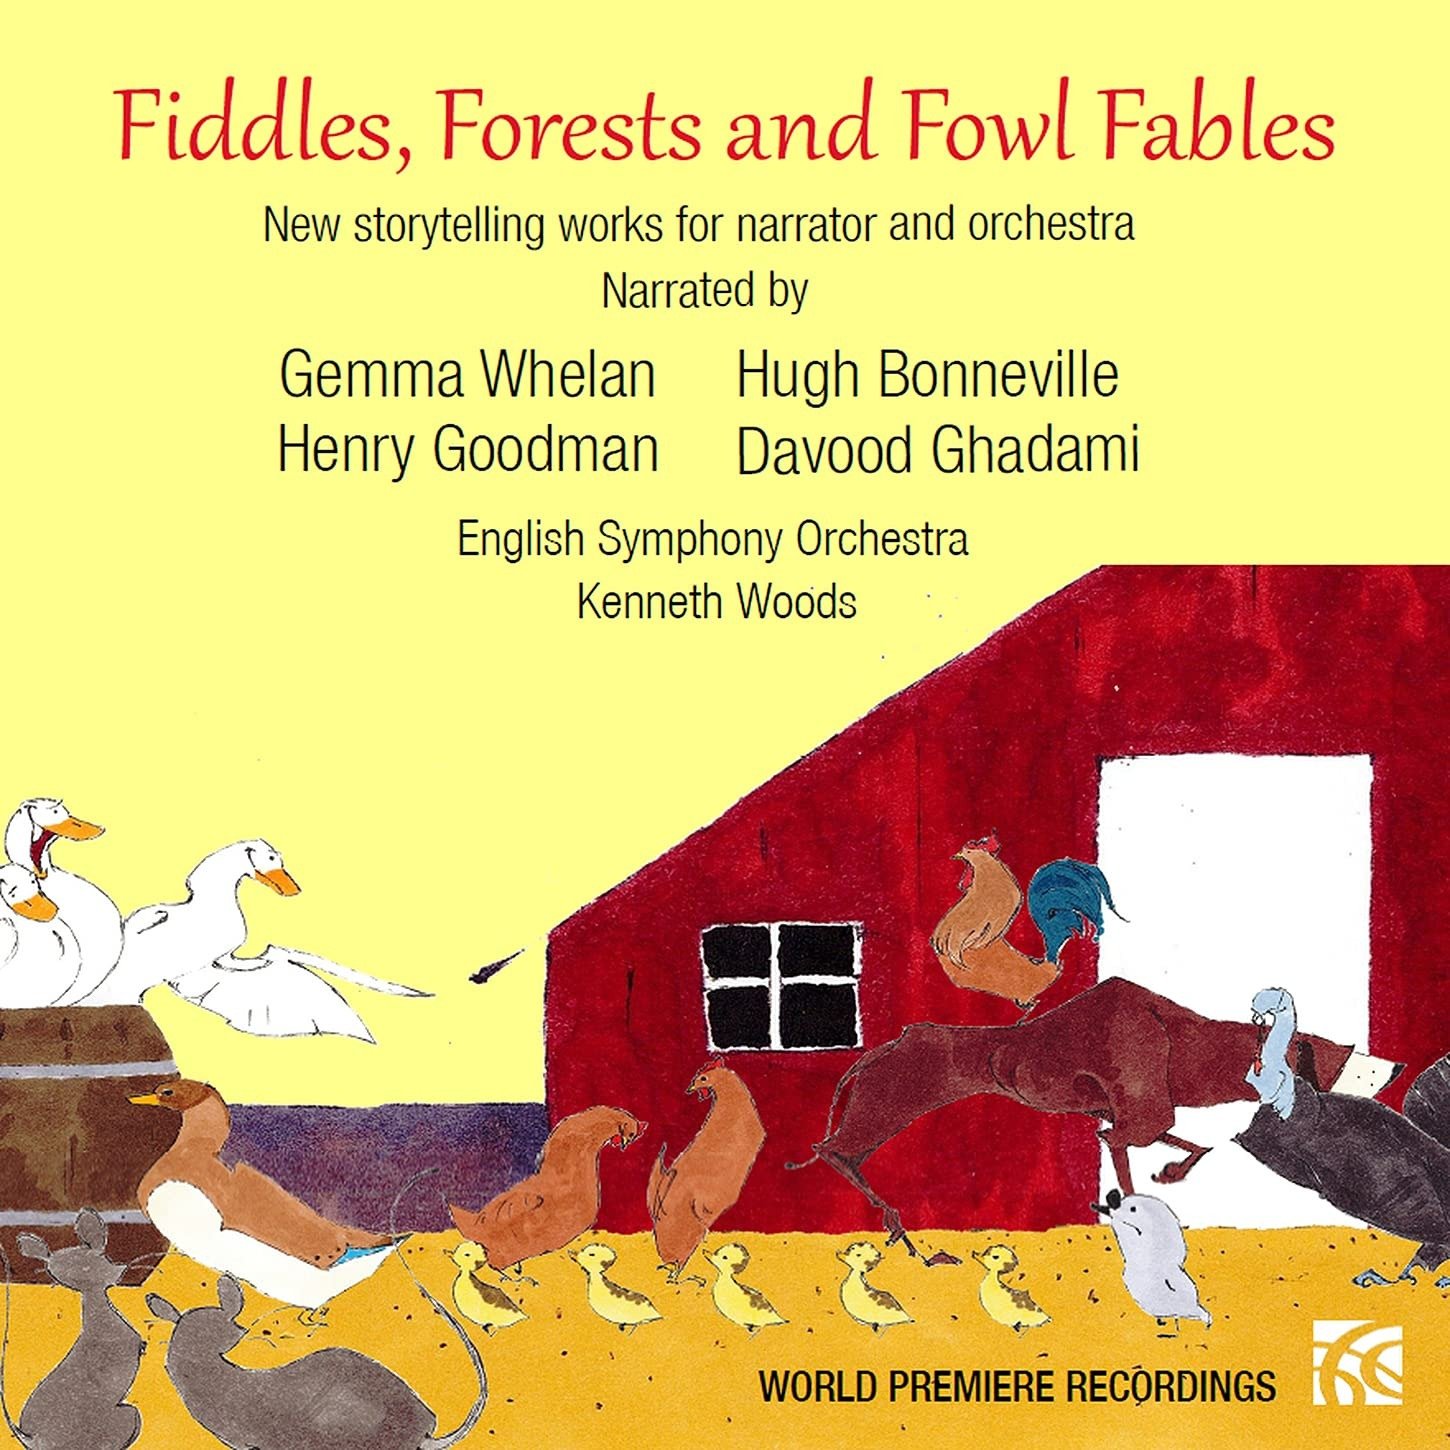 CD Shop - WHELAN, GEMMA FIDDLES, FORESTS AND FOWL FABLES